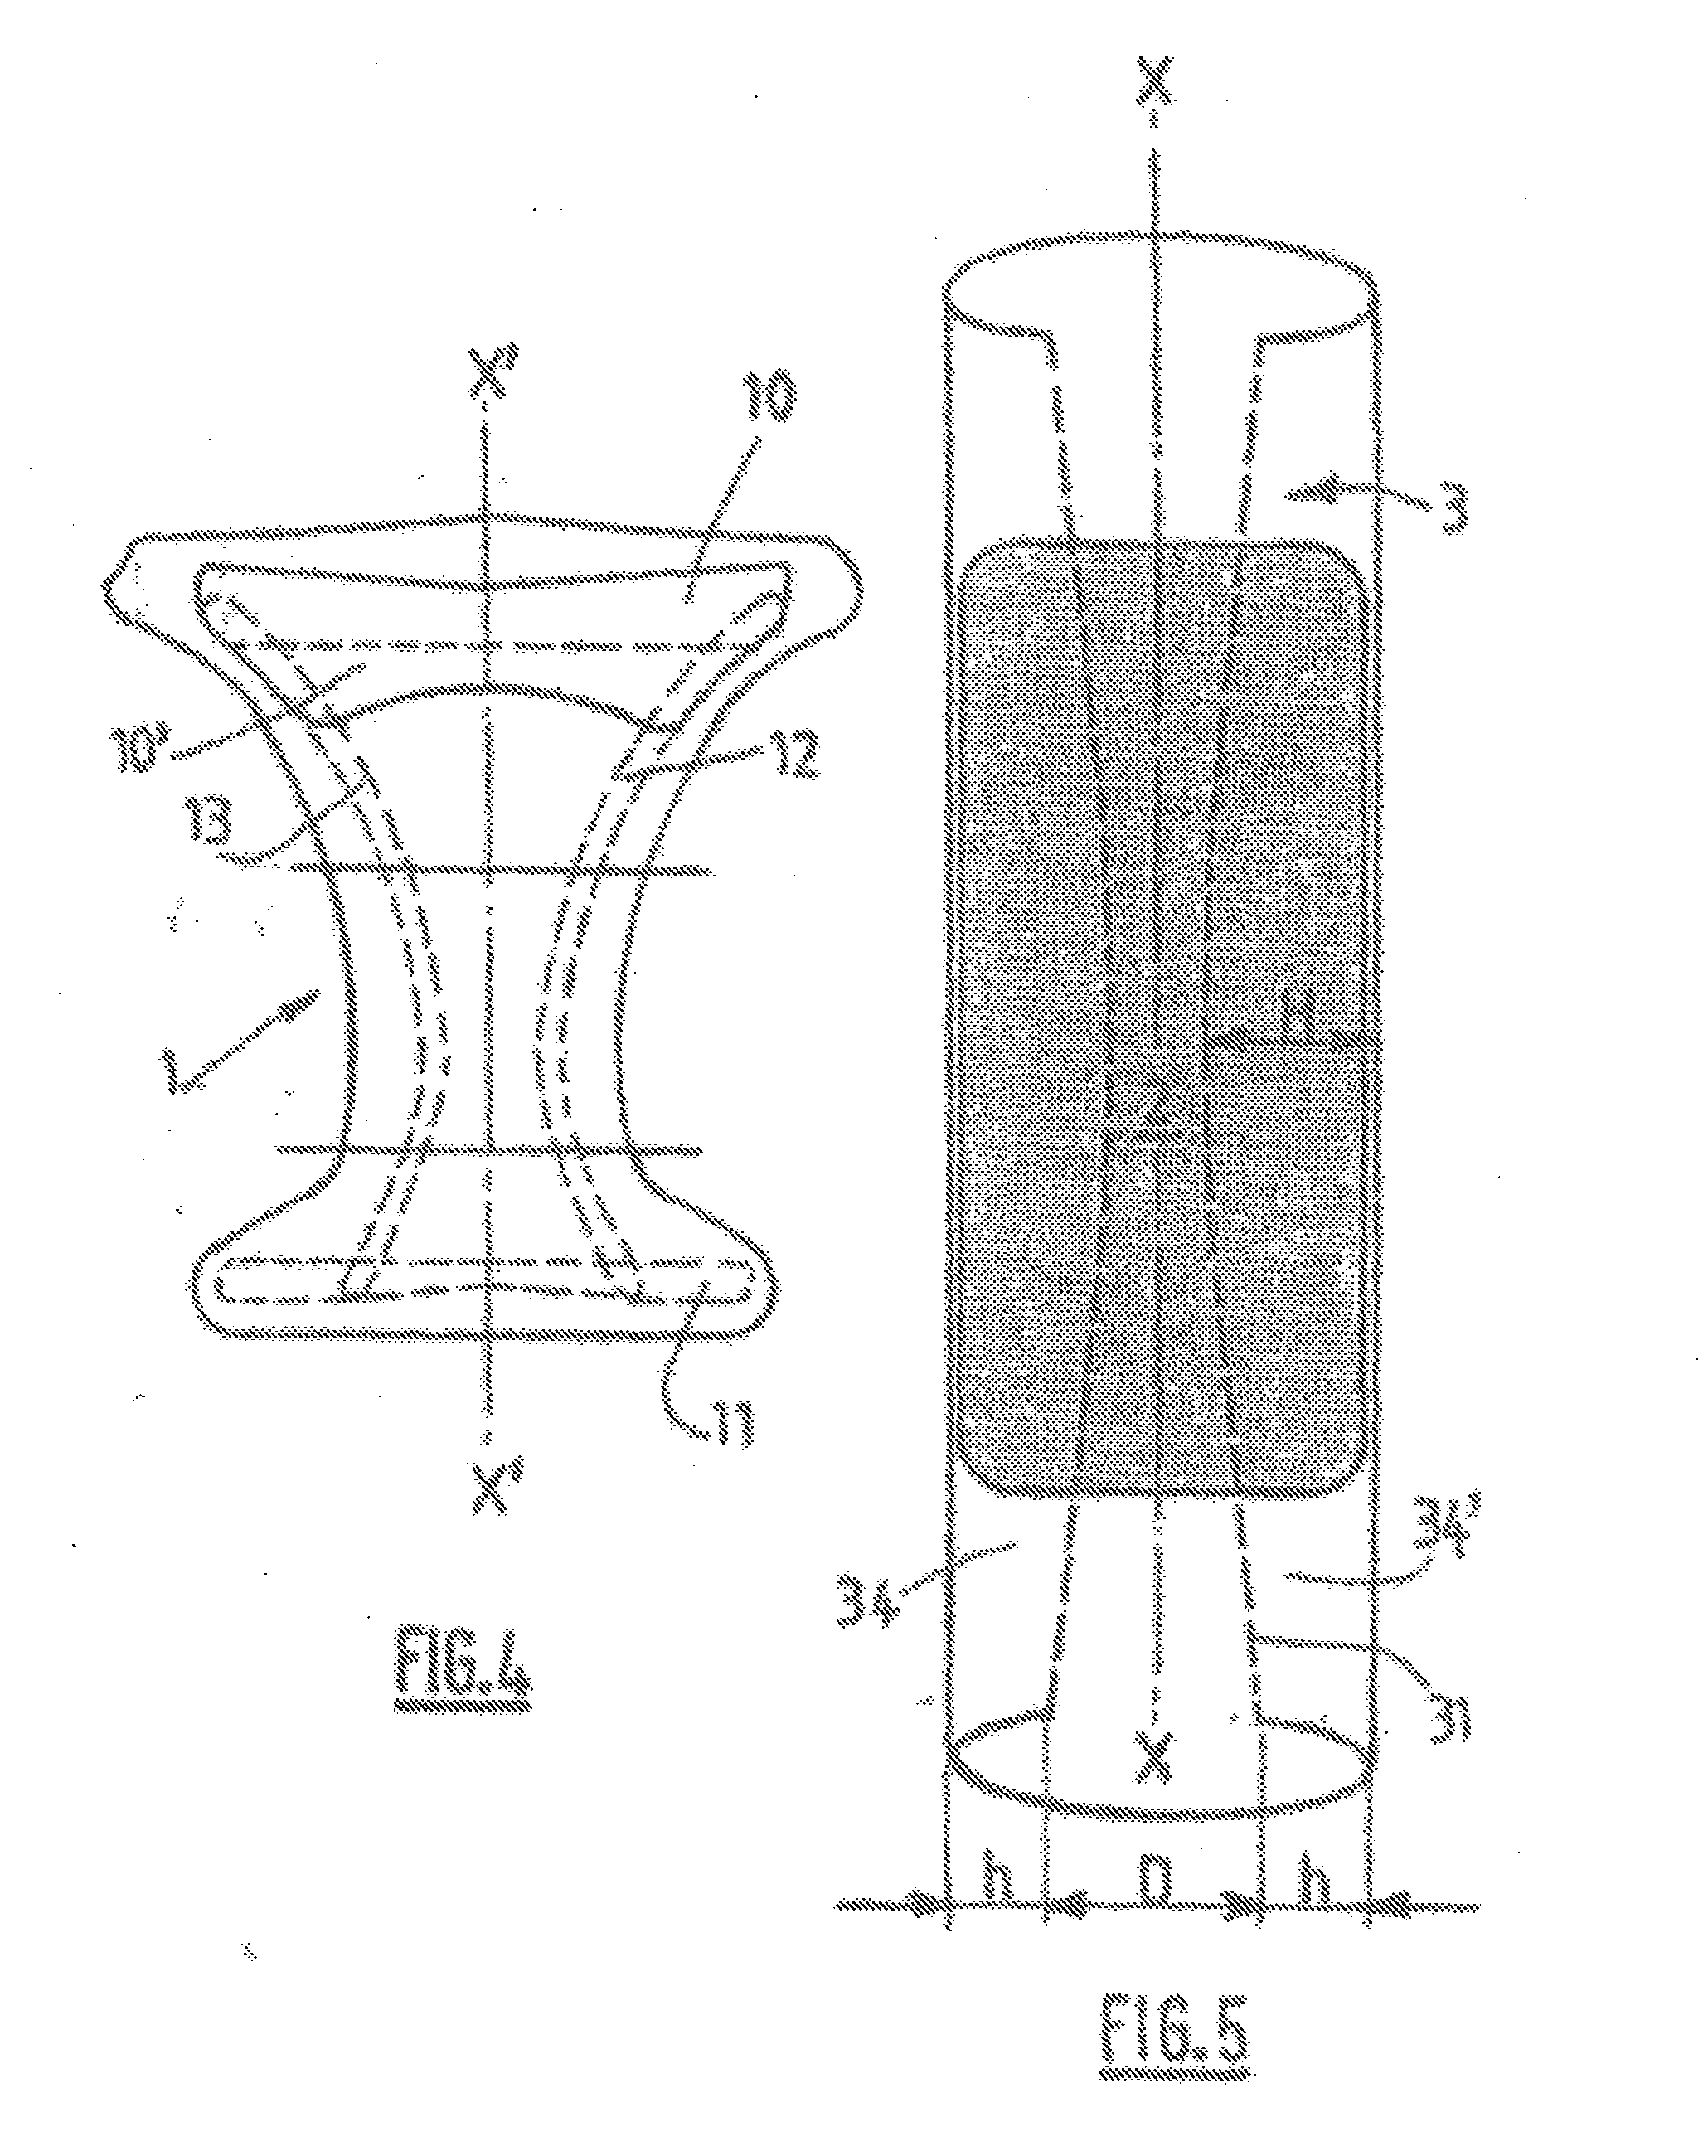 Structure with a reusable absorbent layer and associated sleeve